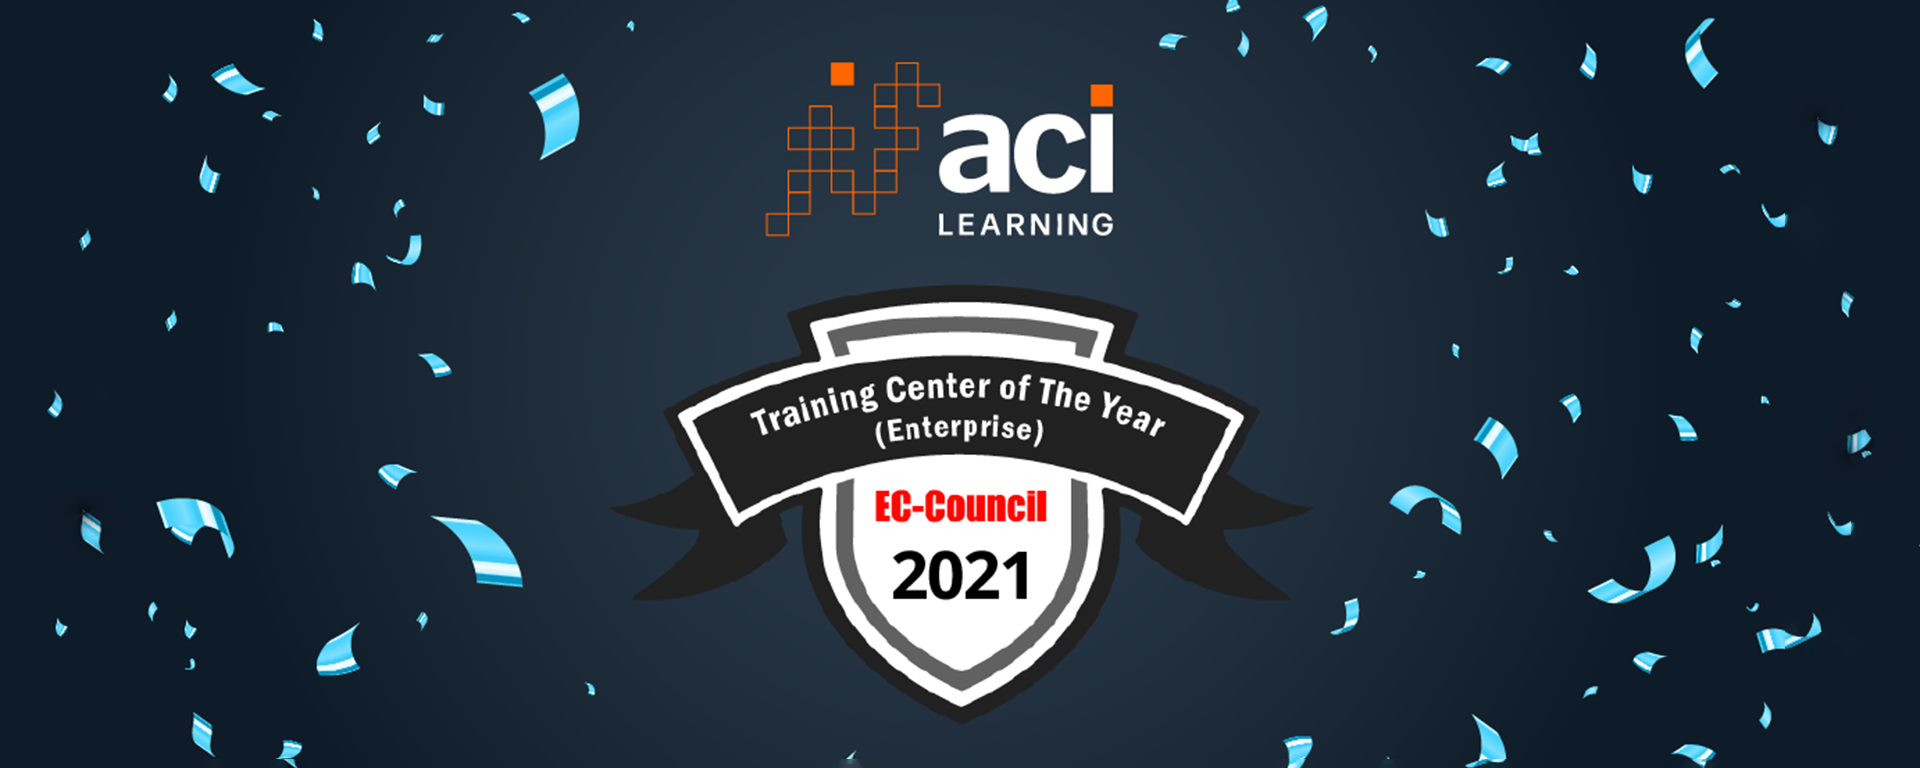 EC-Council Training Center of the Year Award | News